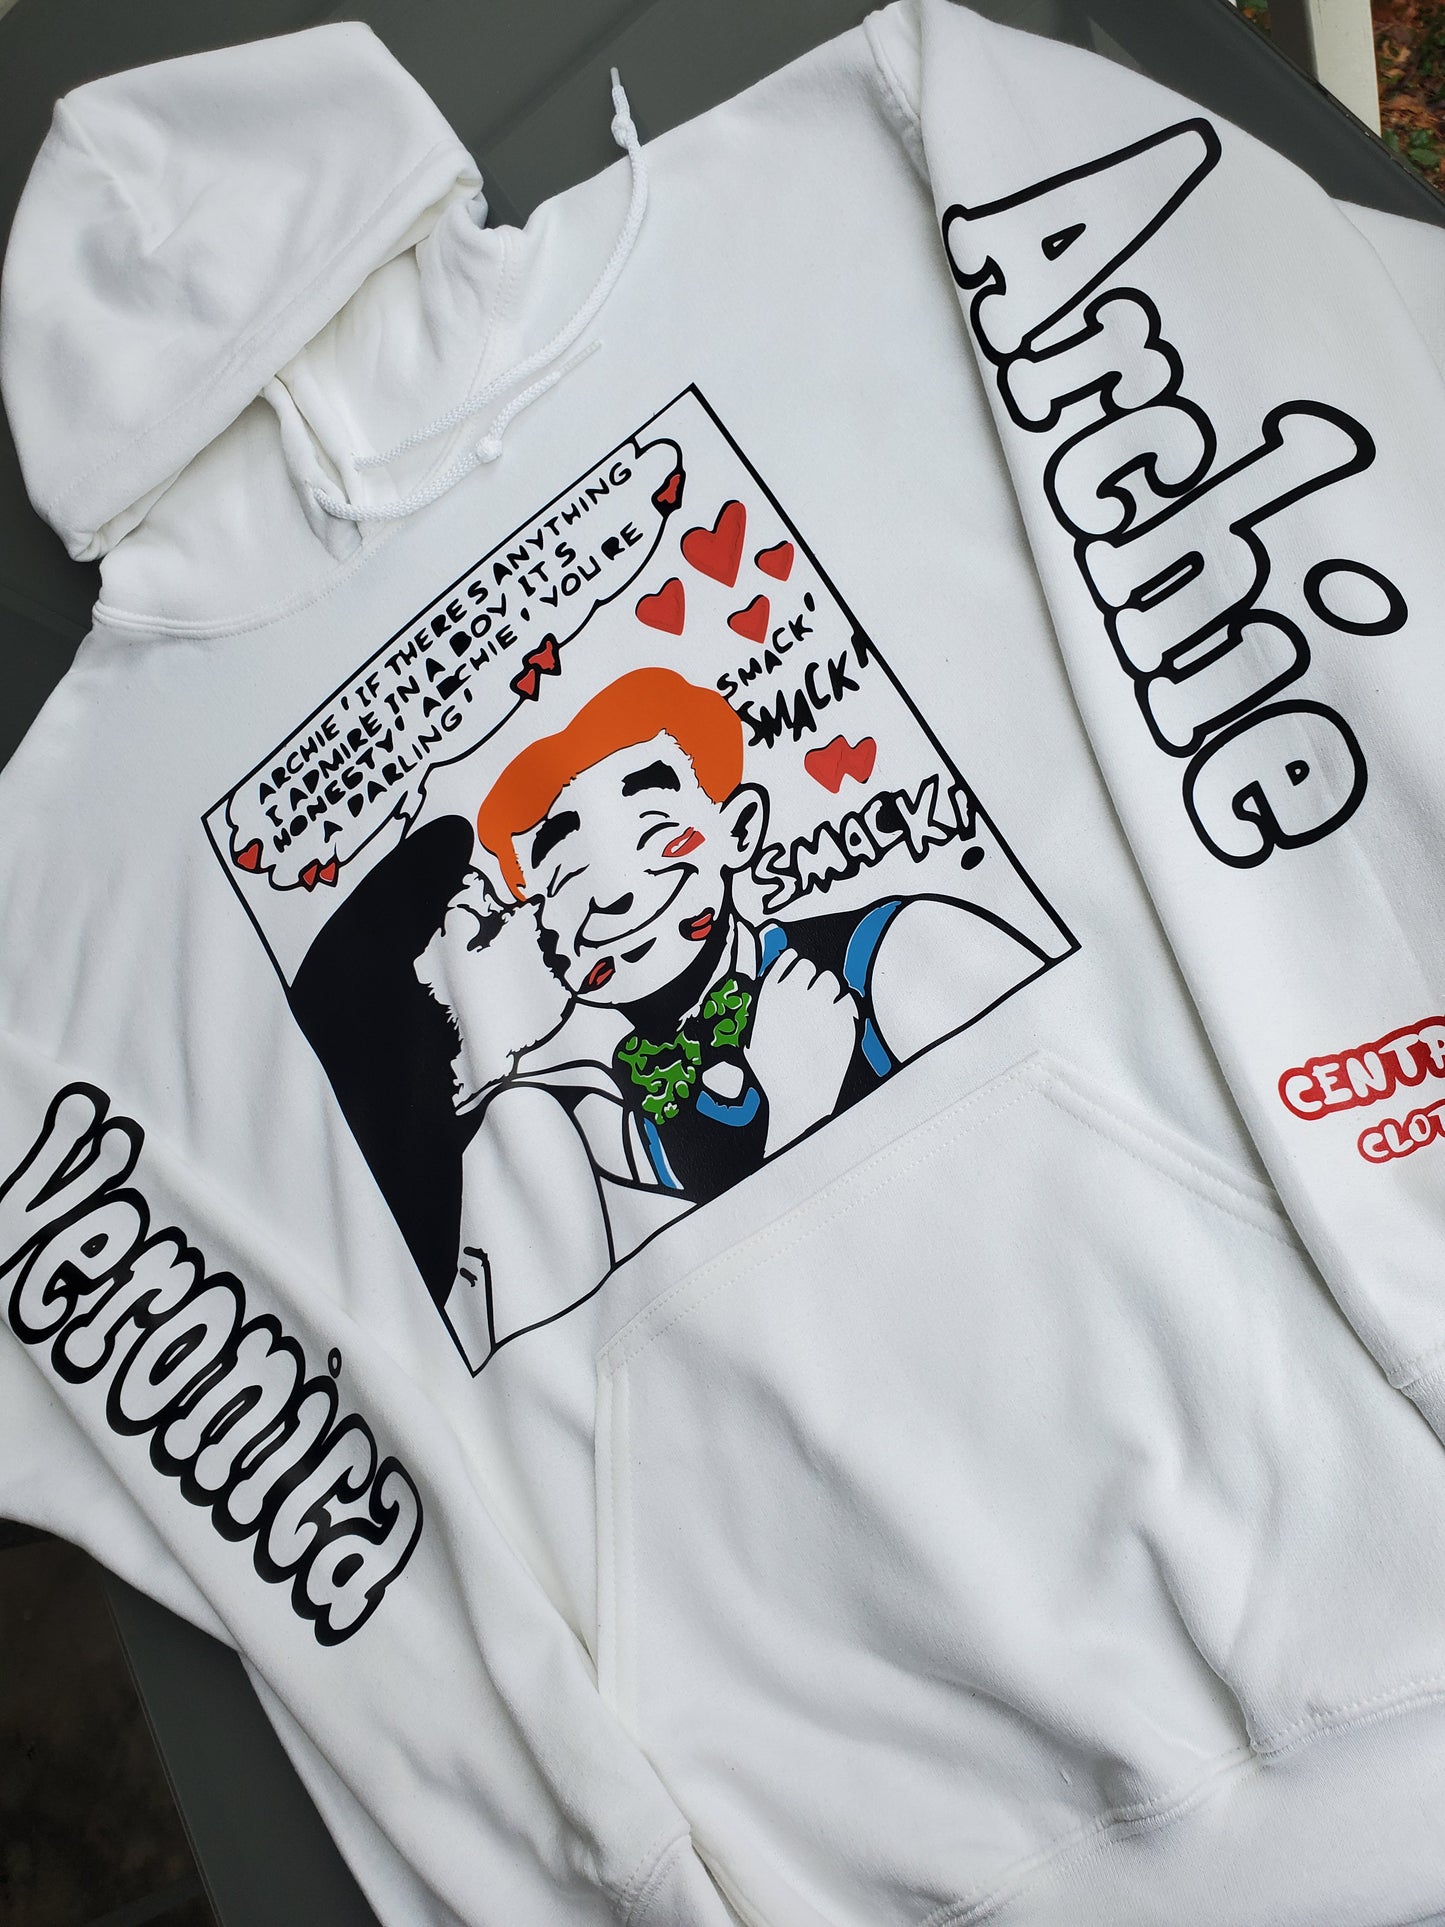 Old School Love Hoodie - Centre Ave Clothing Co.